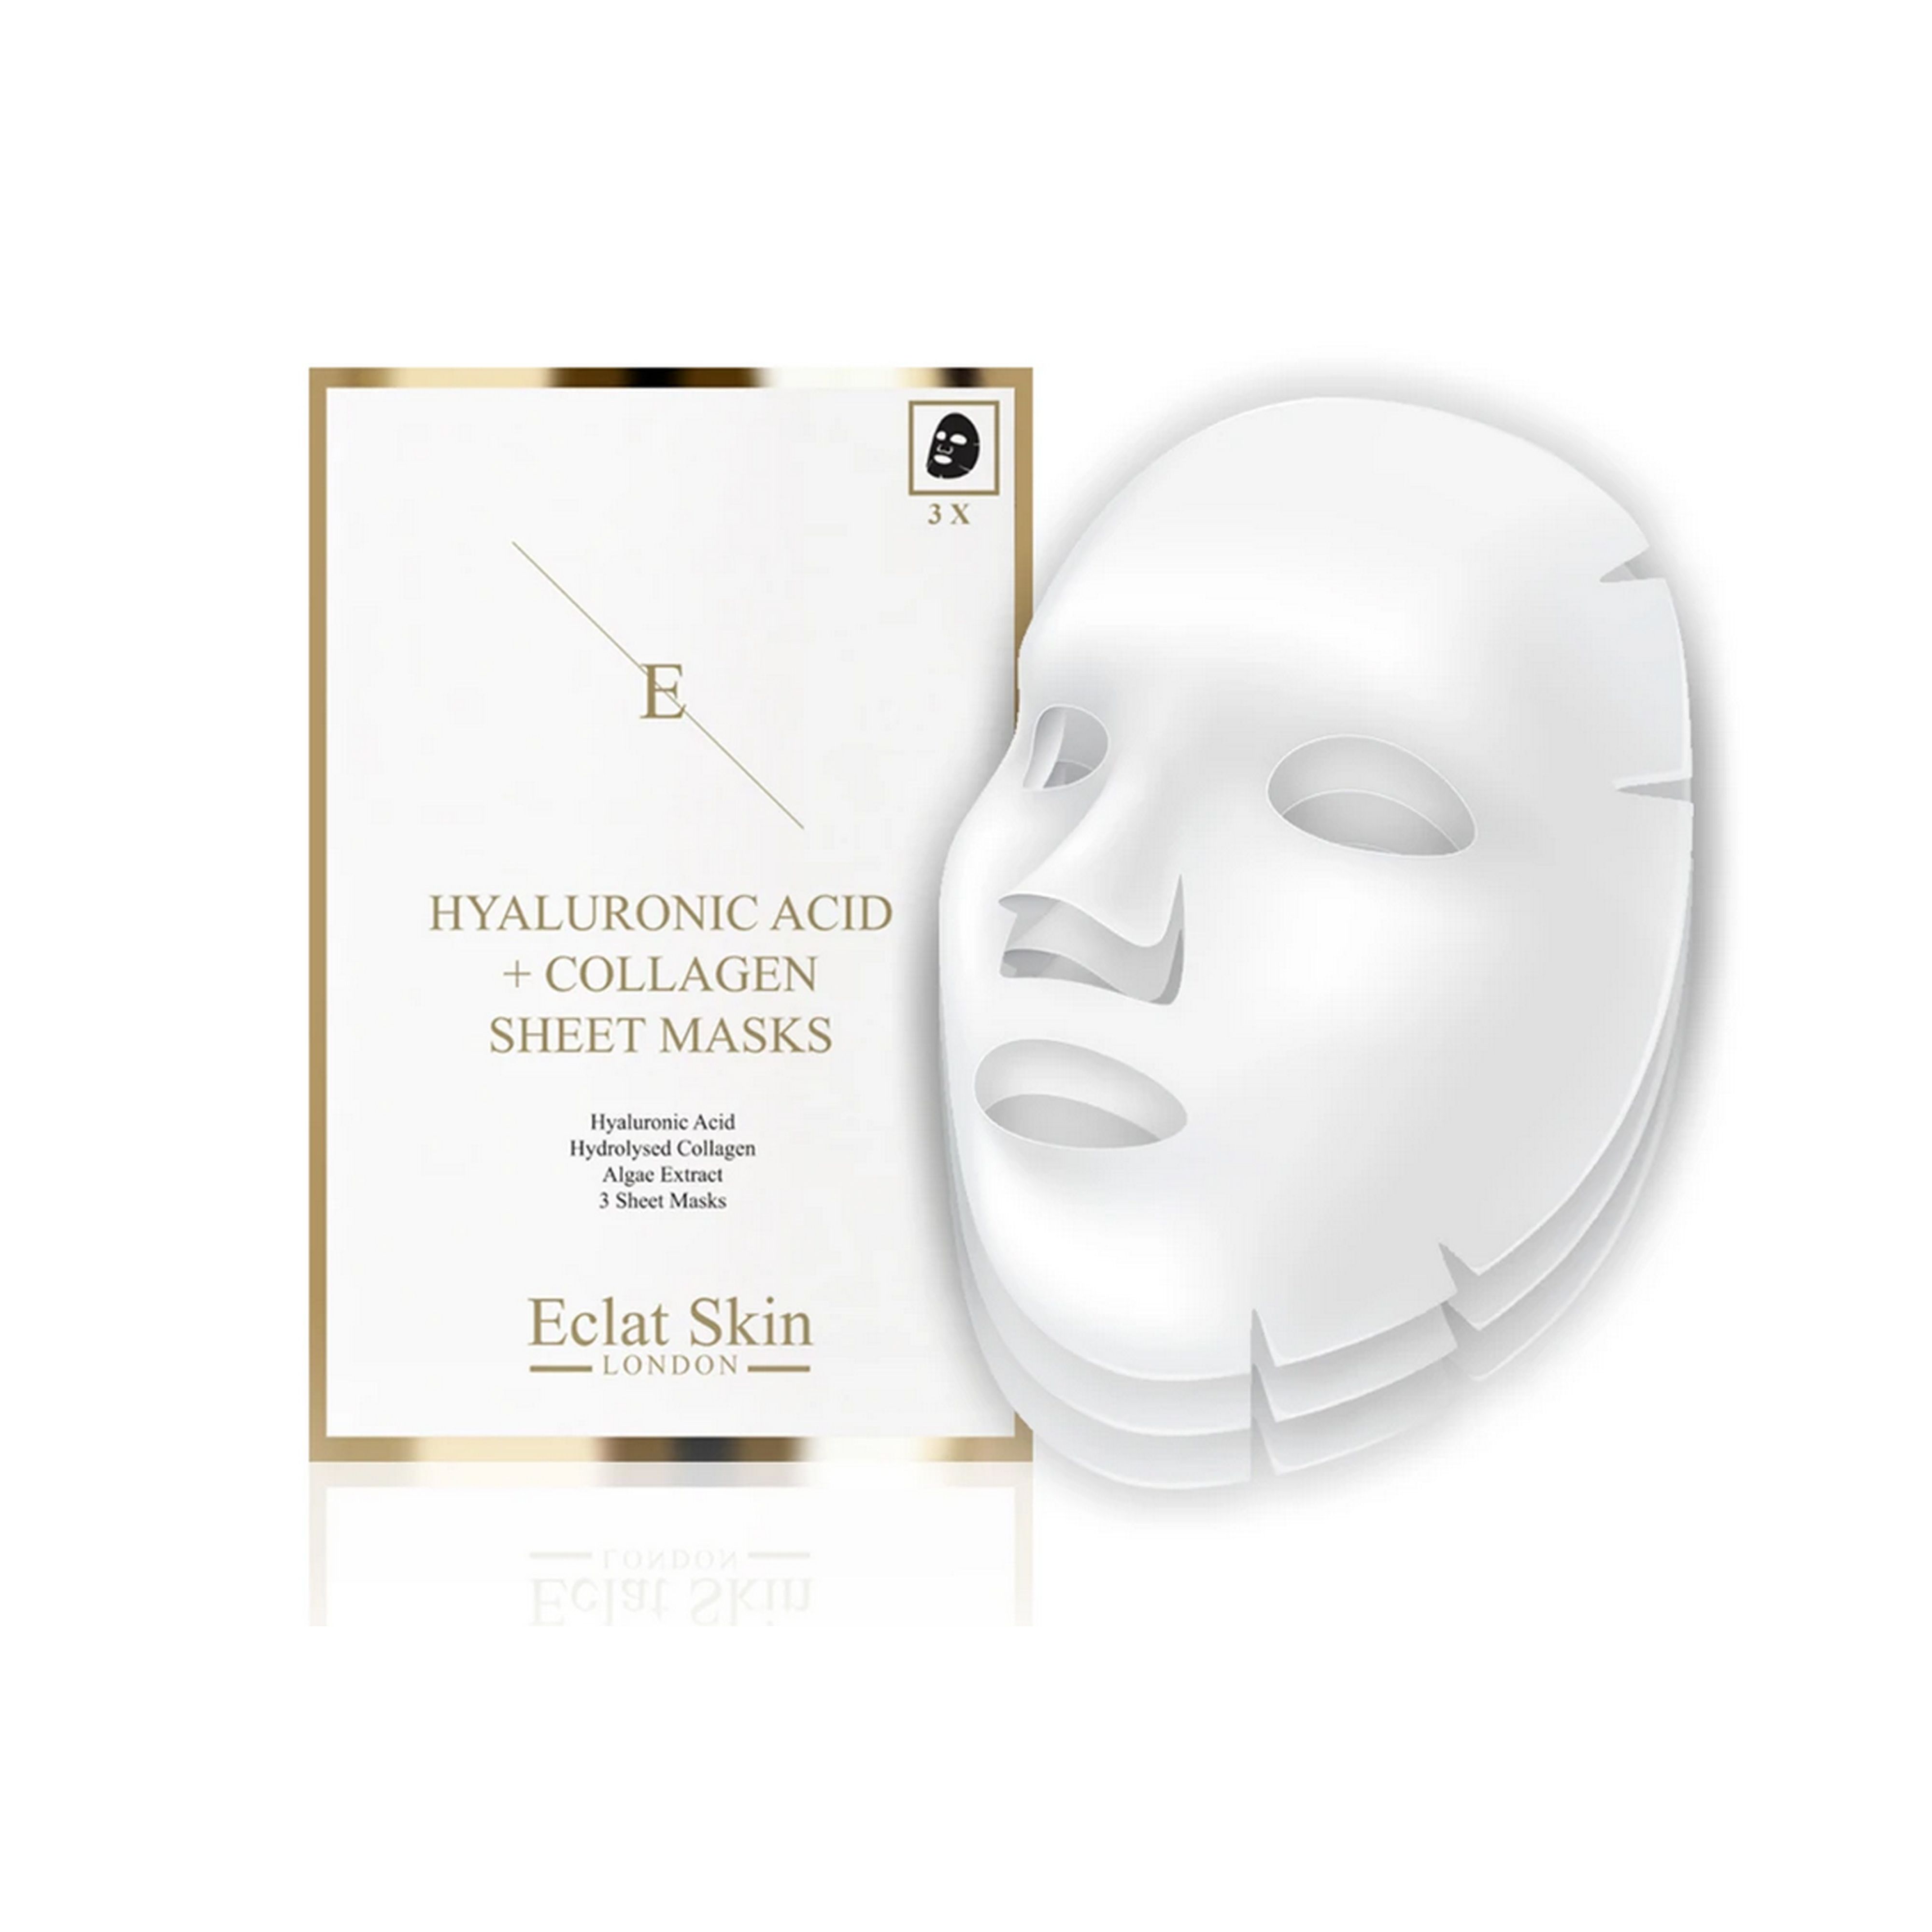 SHEET MASK WITH HYALURONIC ACID AND COLLAGEN


Three luxury 30-minute hydration treatment sheet masks with pioneering formula that contains Hyaluronic Acid, Collagen, Algae Extract and three natural extracts high in antioxidants. Designed to hydrate, nourish and plump dehydrated and dull looking skin. Use before makeup, special event or as a weekly relaxation and hydration treatment.

HYALURONIC ACID
Hyaluronic Acid is naturally found in our skin, as we age our body's natural production of hyaluronic acid slows down. Hyaluronic acid is a key element making the skin looking plump and youthful as it hold moisture 1000 times its own weight. Our hyaluronic acid is called Sodium Hyaluronate and it is smaller size of hyaluronic acid that is able to penetrate and hydrate more deeper levels of the skin than normal hyaluronic acid.

HYDROLYSED COLLAGEN
Collagen is naturally found in our skin and as we age the production of collagen slows down. As an skincare ingredient collagen aims to boost plumpness and the look of the skin by bringing moisture and hydration to the skin.

NATTO GUM
Natto gum is a fermentation product of soya protein and powerful antioxidant that aims to protect the skin from free radical damage.

MULBERRY EXTRACT
Mulberry extract is an antioxidant with skin brightening properties.

GINKGO BILOBA LEAF EXTRACT
Ginkgo Biloba leaf extract is an antioxidant that aims to protect the skin from free radical damage.


Directions for use: Take the mask out of the package, carefully place it over clean and dry face, and smooth it out with your fingers. Take the mask off after approximately 30 minutes. Delicately massage the remaining serum in, and allow it to be fully absorbed or wipe away with cloth.